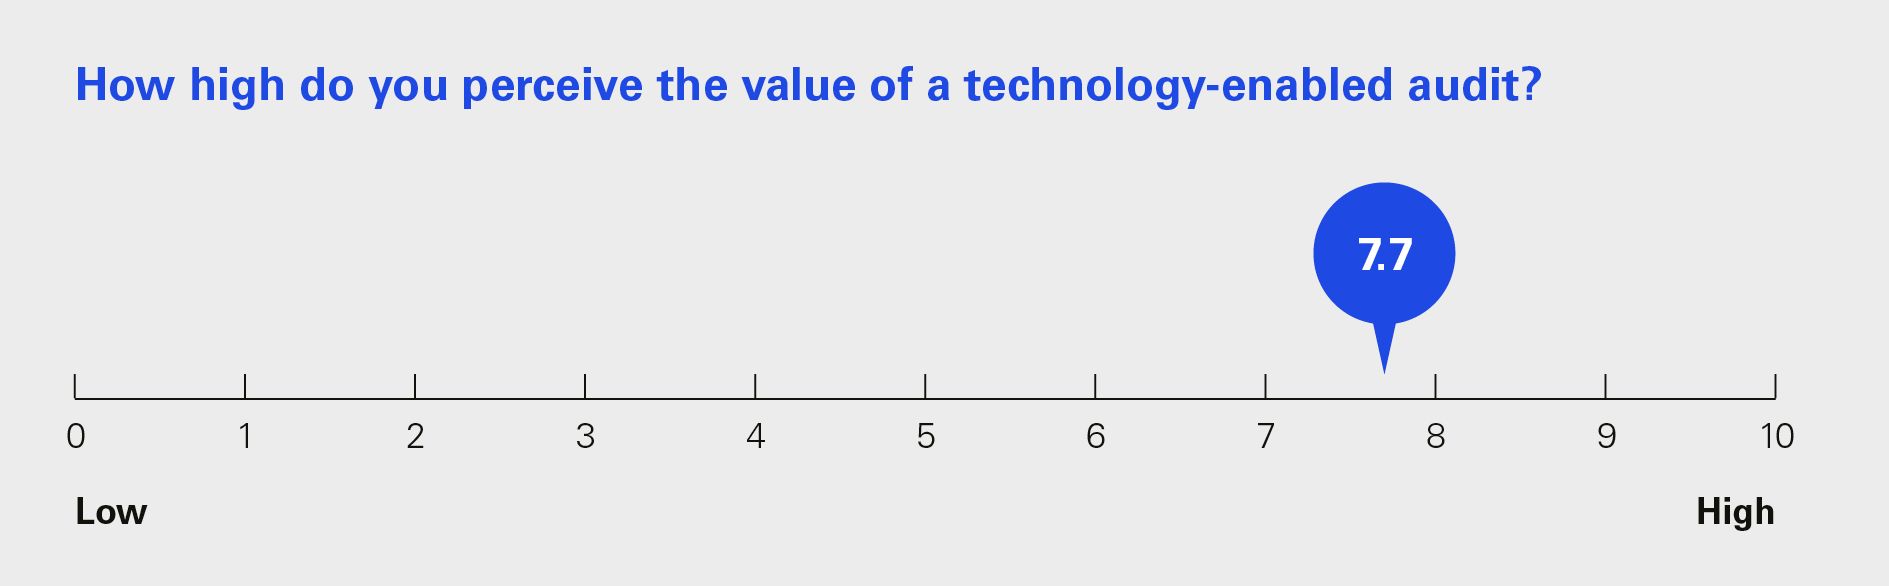 How high do you perceive the value of a technology-enabled audit?